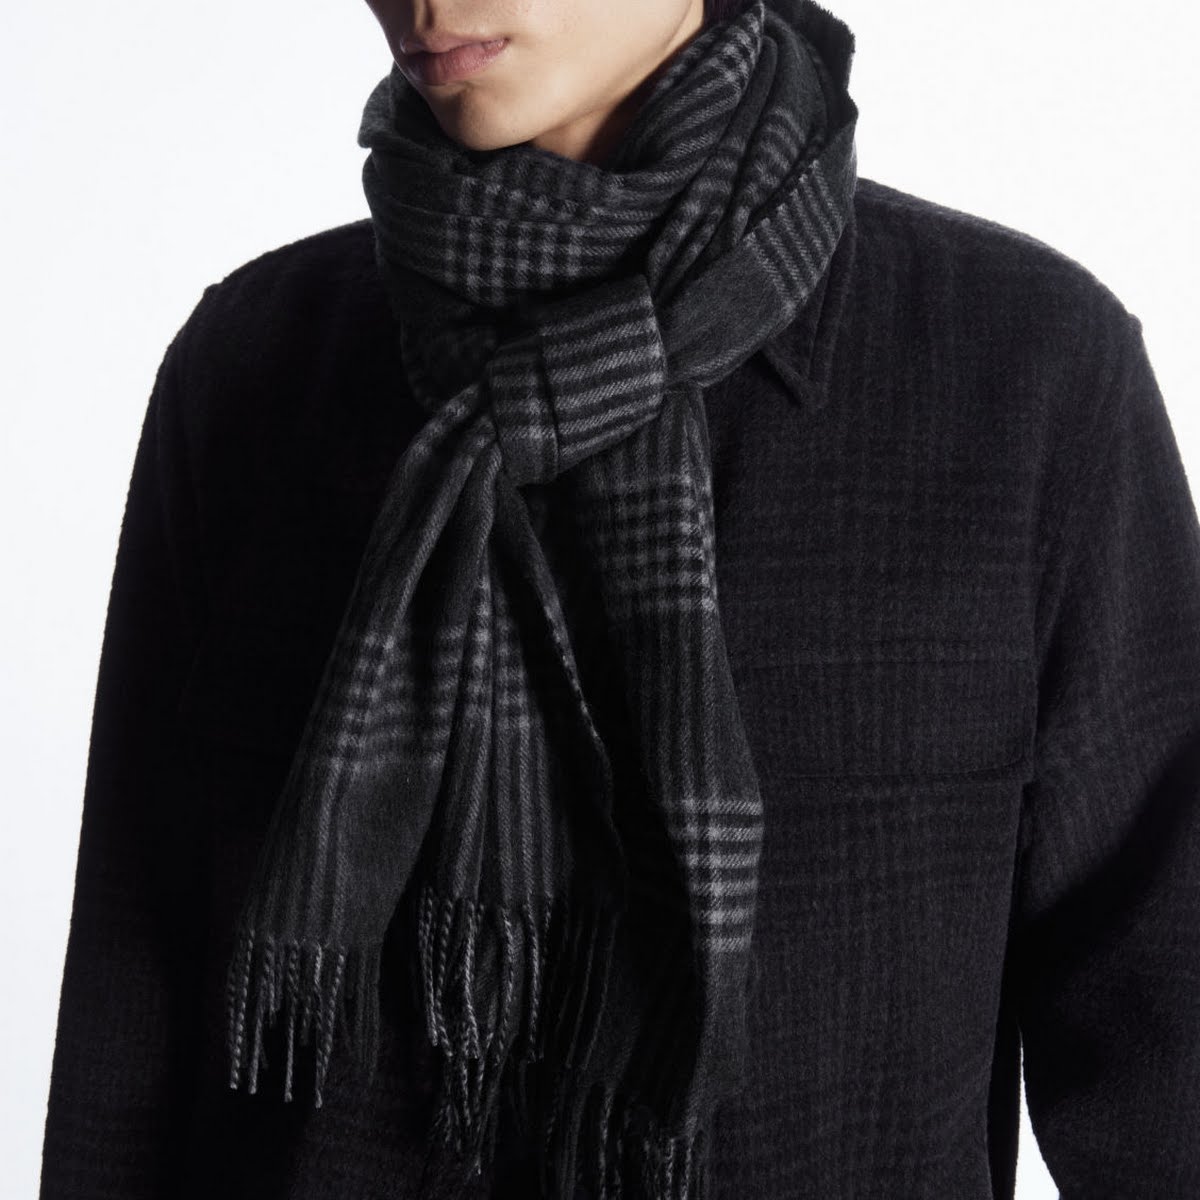 COS Wool and Cashmere Blend Scarf, €79